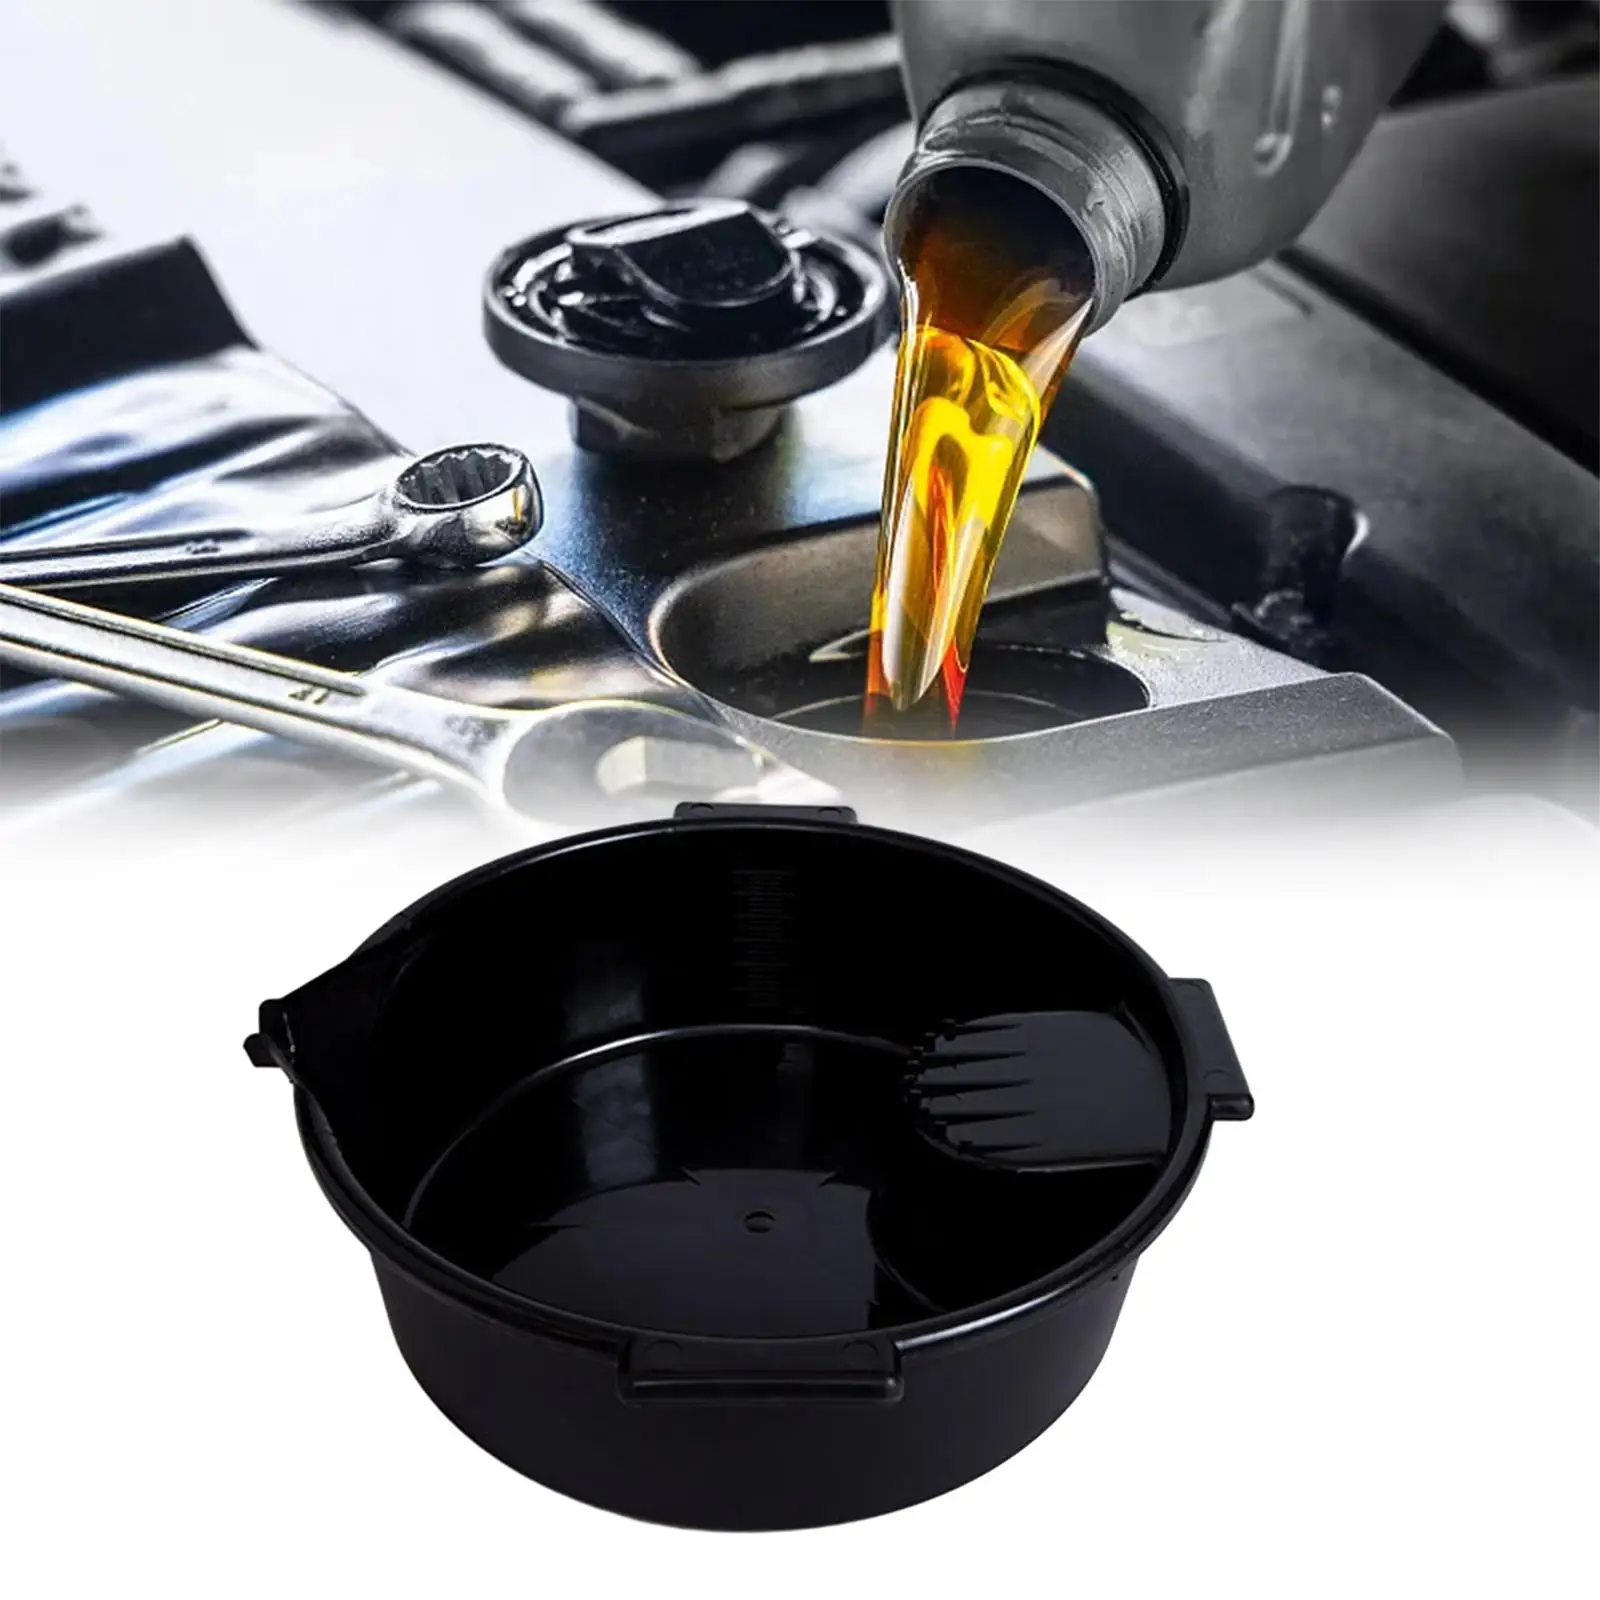 Oil Drain Container Garage Tool Portable All Purpose Oil Change Pan Motor Oil